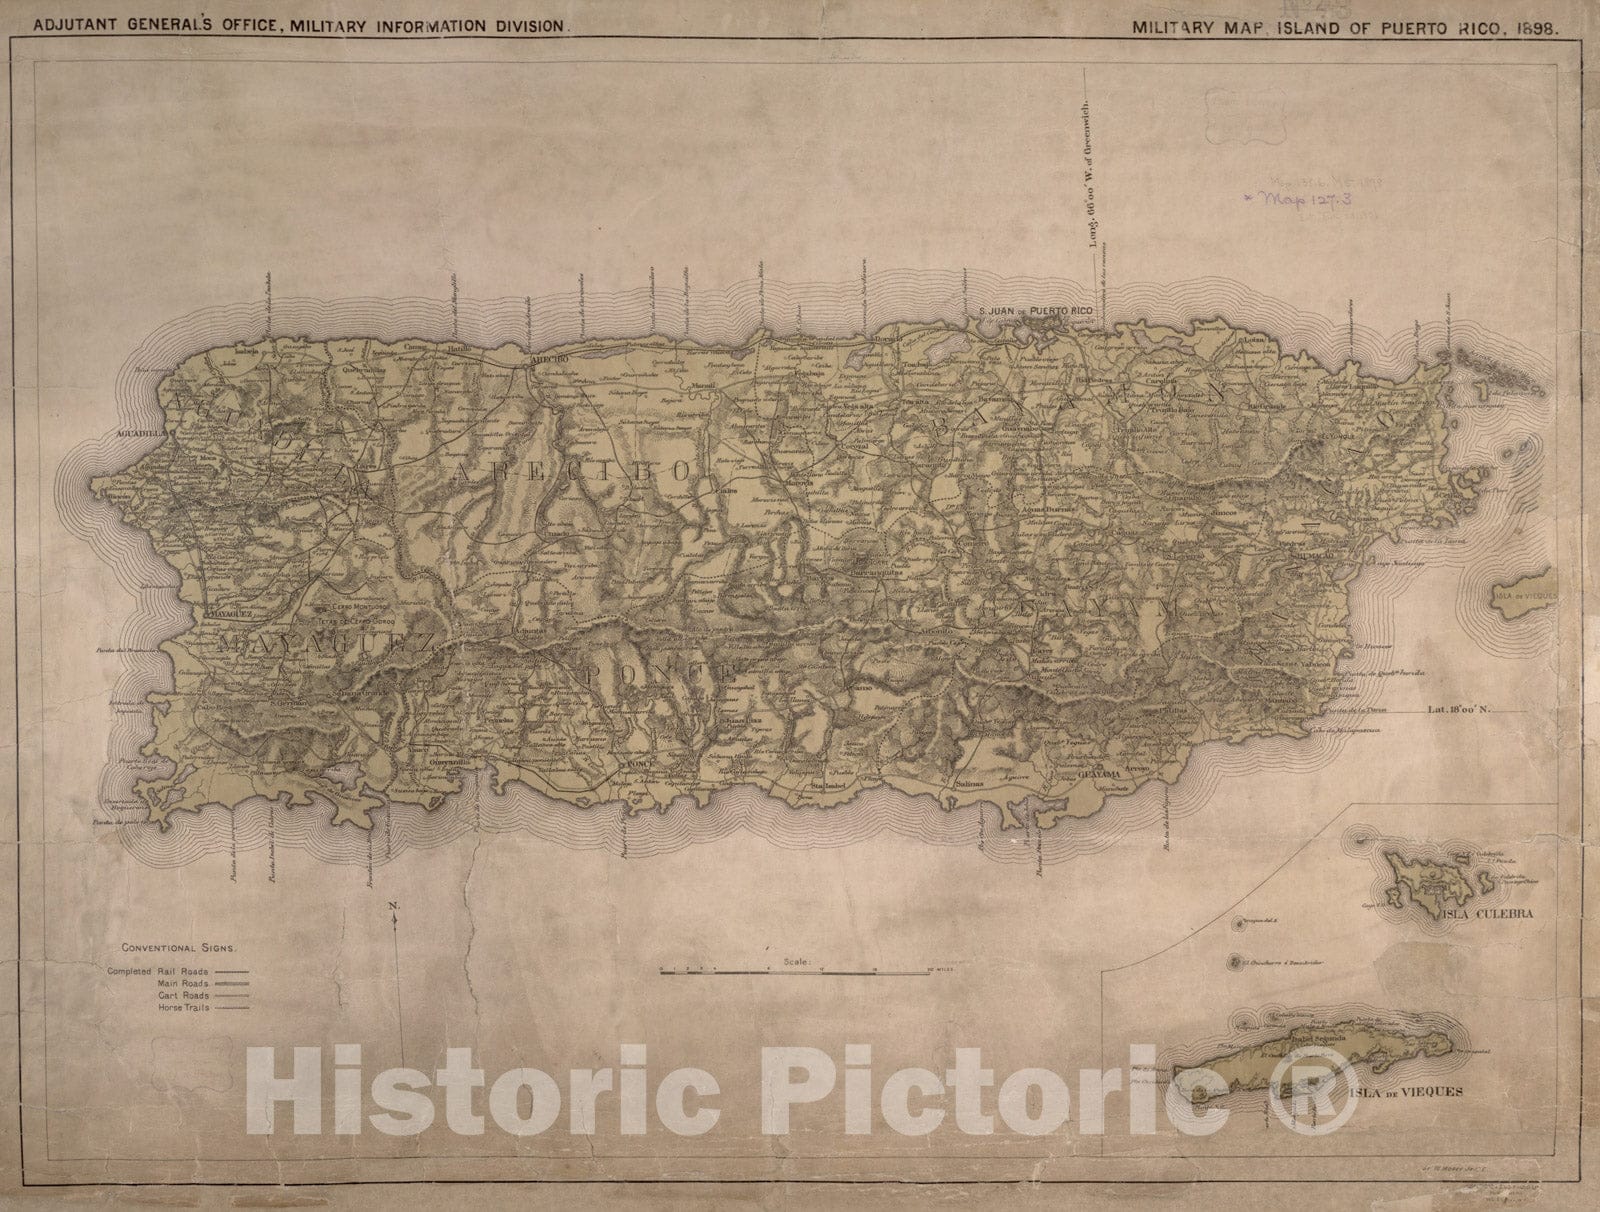 Historical Map, 1898 Military Historical Map, Island of Puerto Rico, Vintage Wall Art